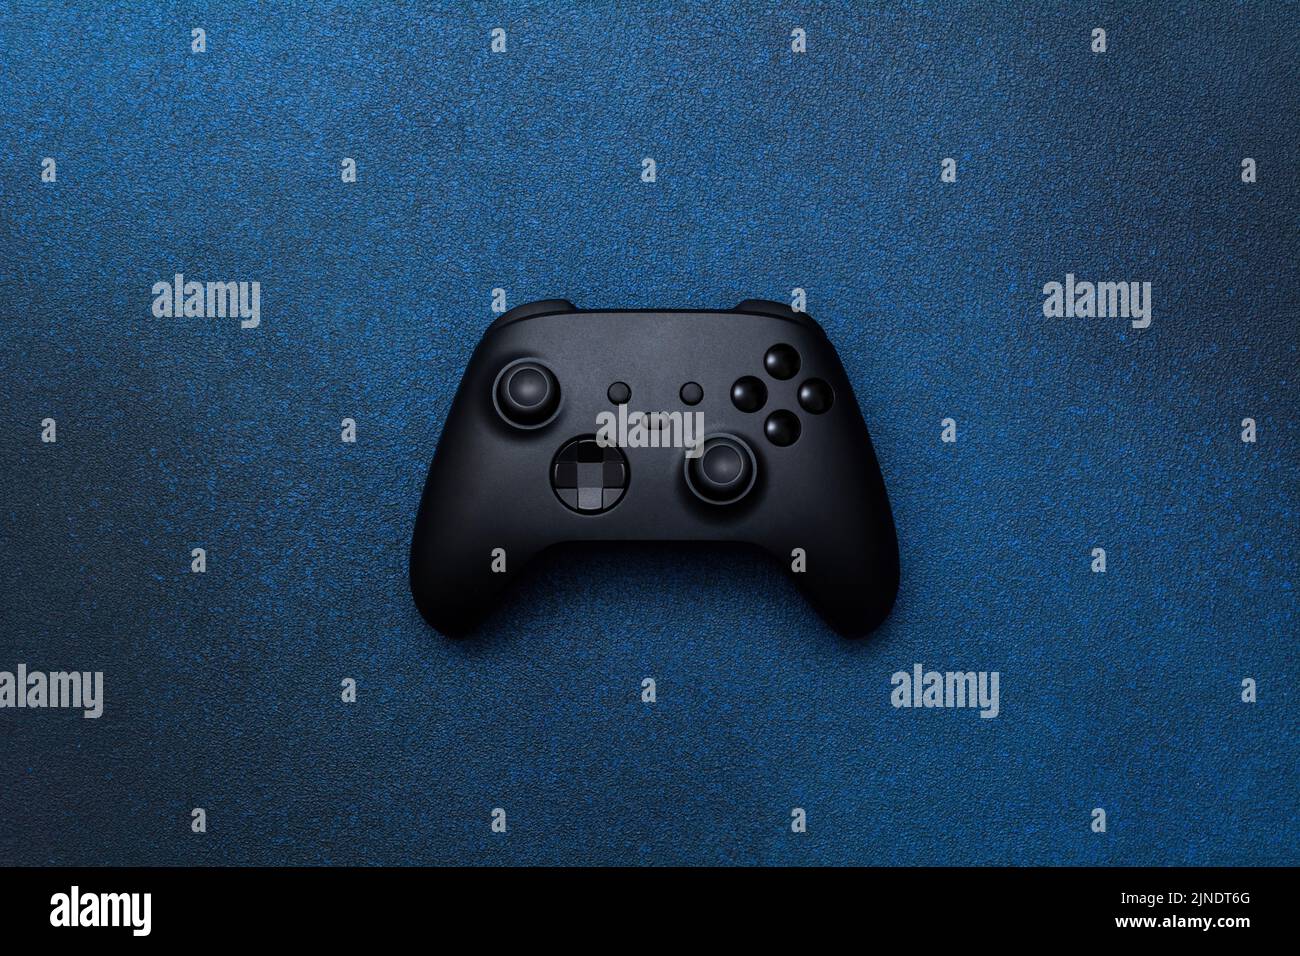 Game controller on a blue background. Black joystick for computer games top view. Stock Photo